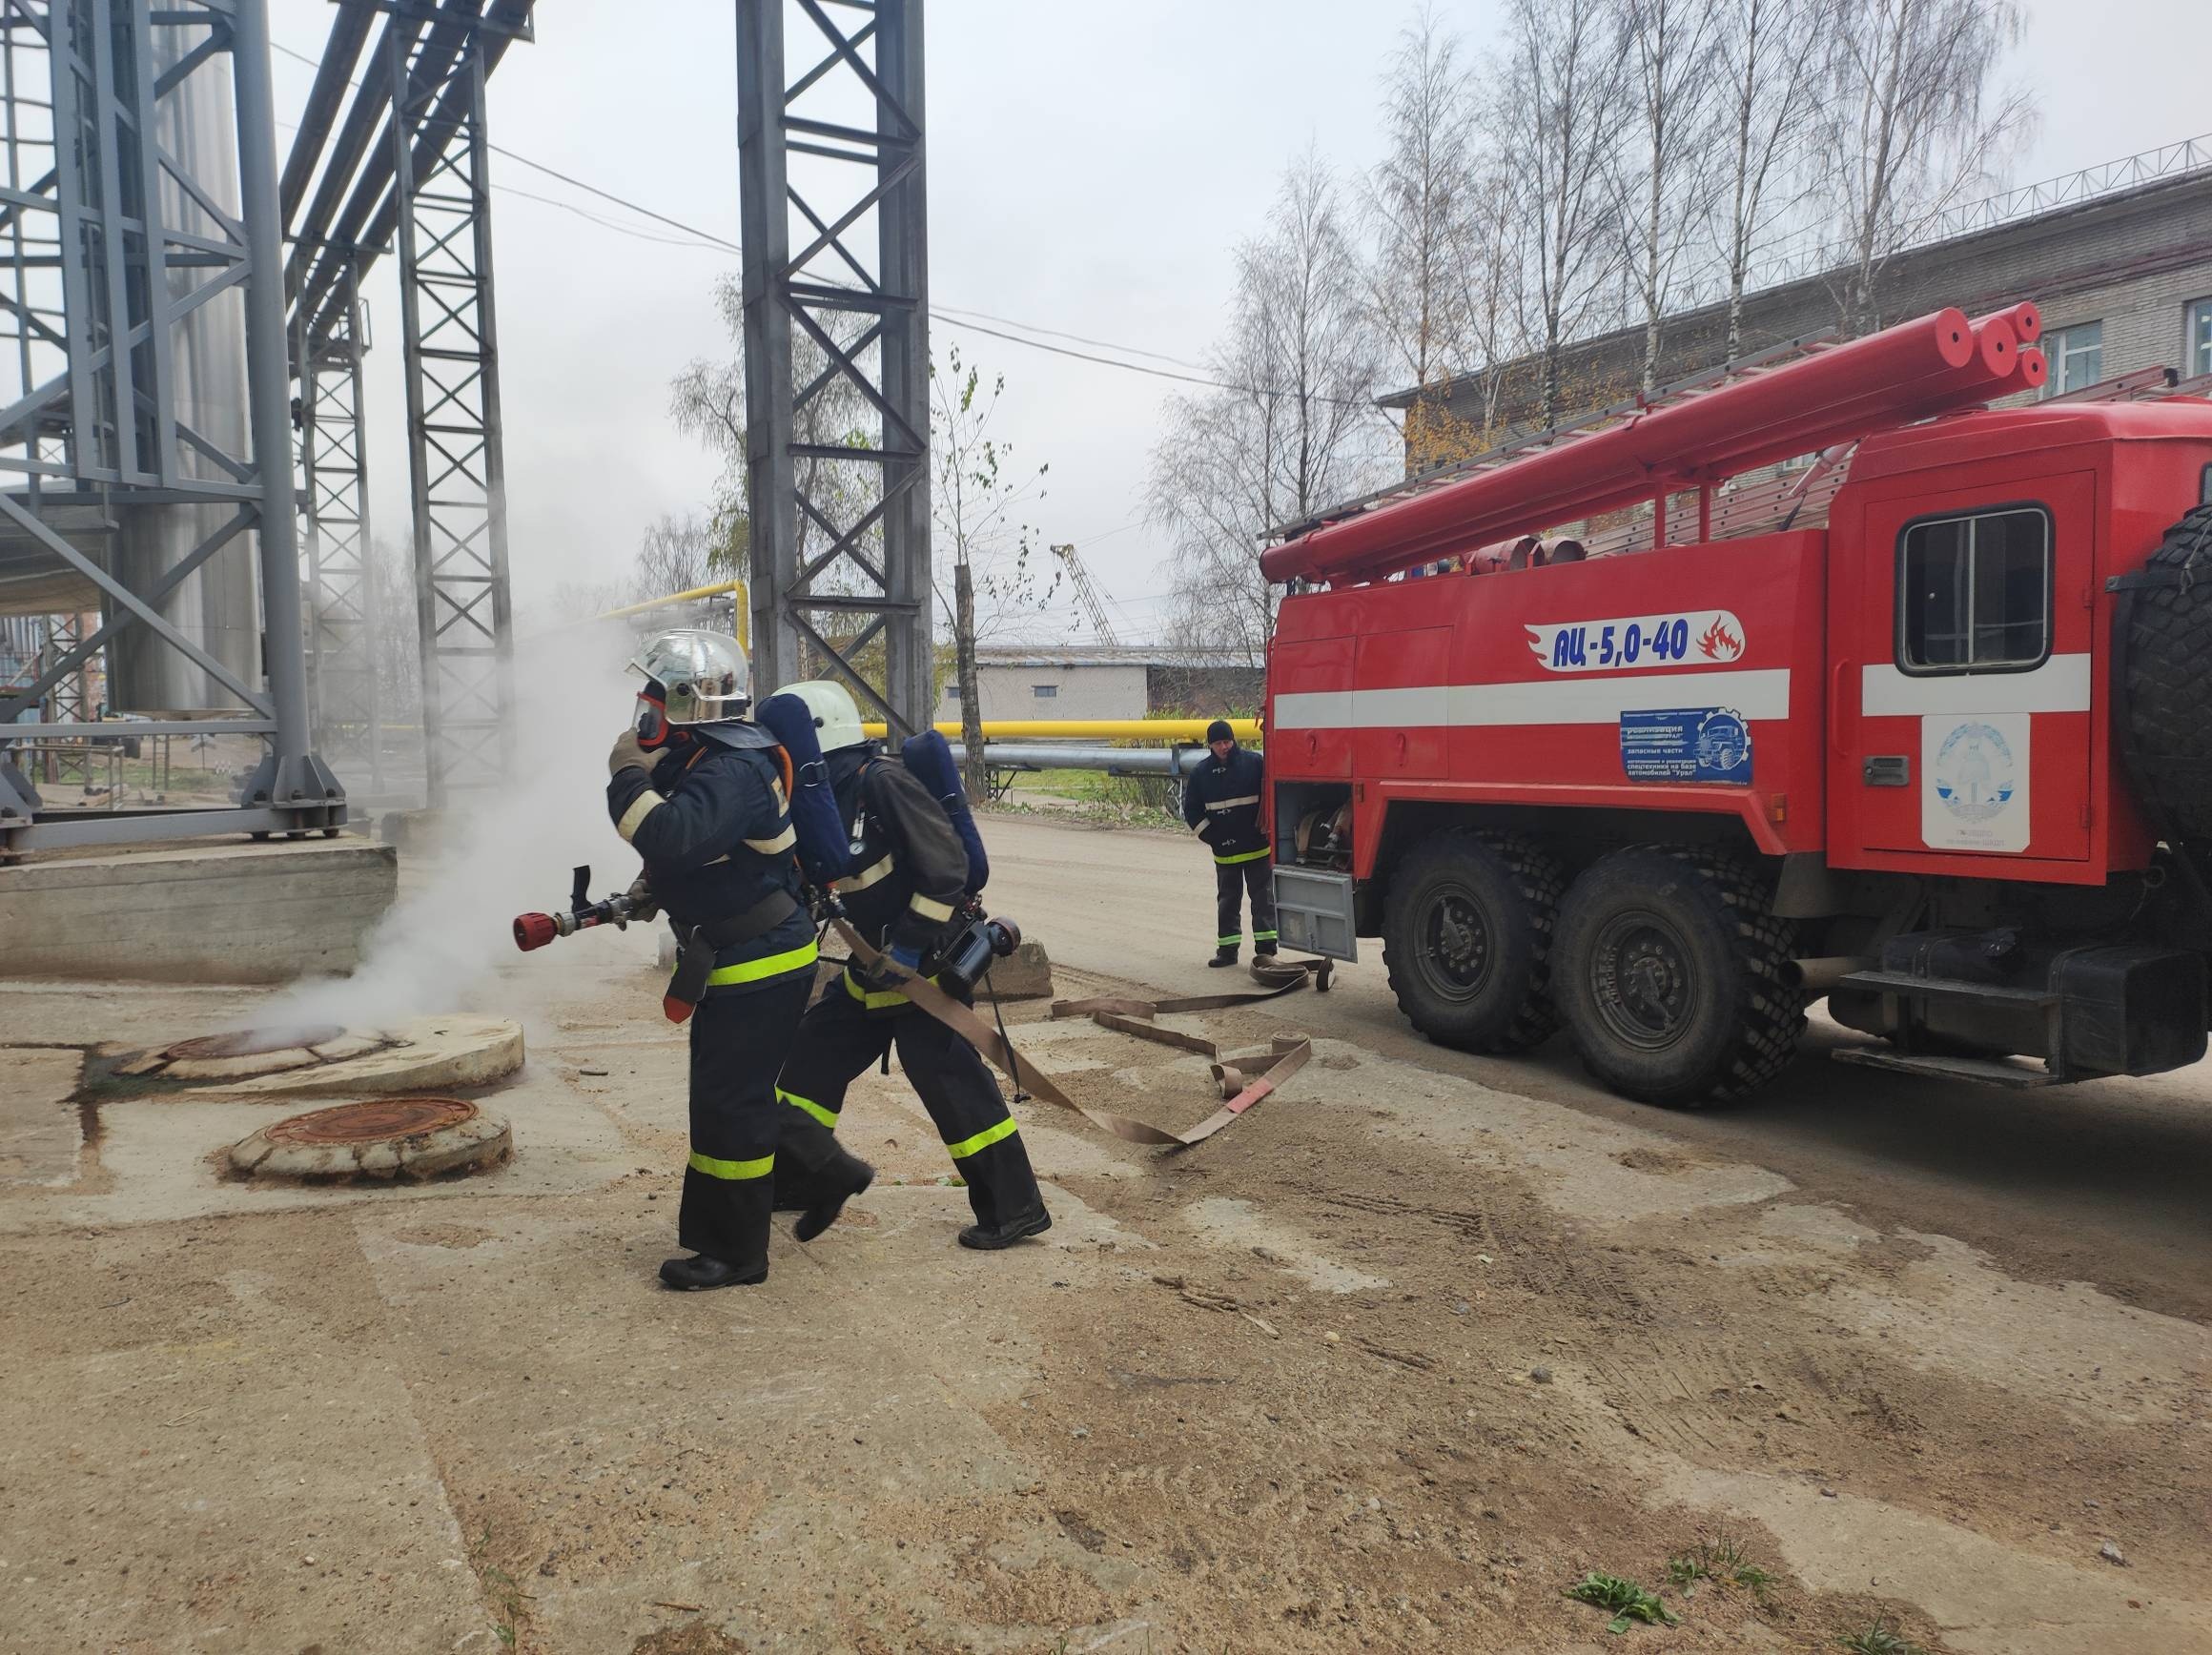 A special training session involving the company’s volunteer fire department was held in the boiler room